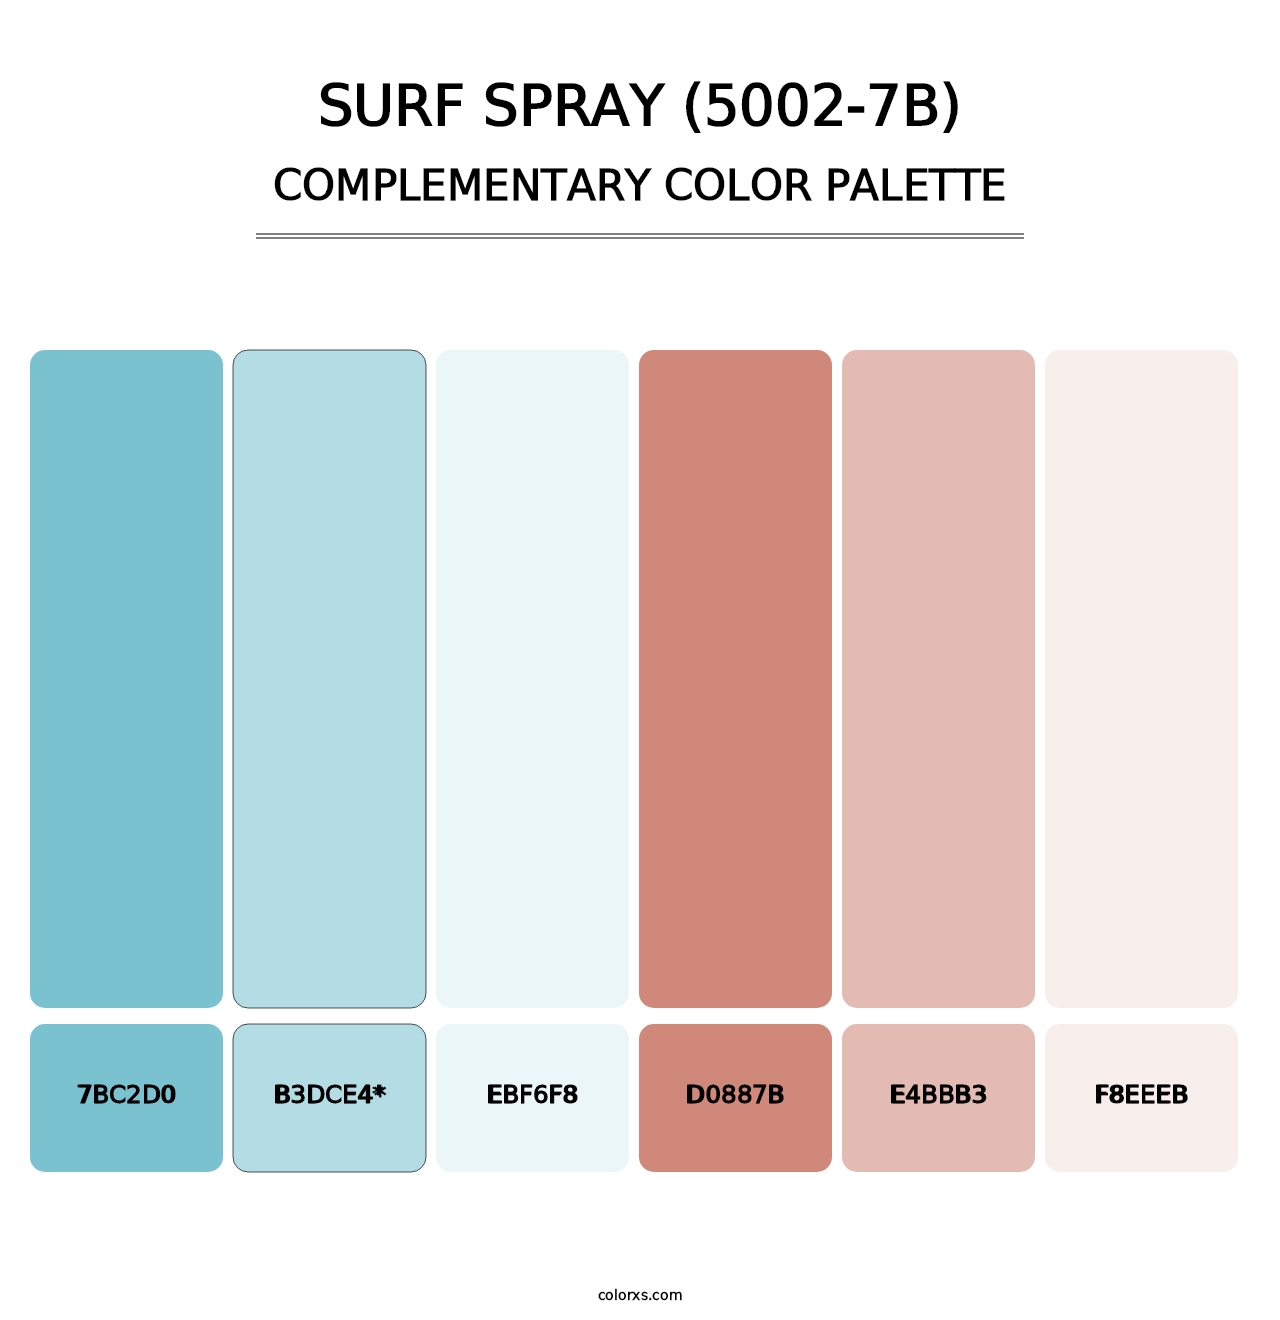 Surf Spray (5002-7B) - Complementary Color Palette